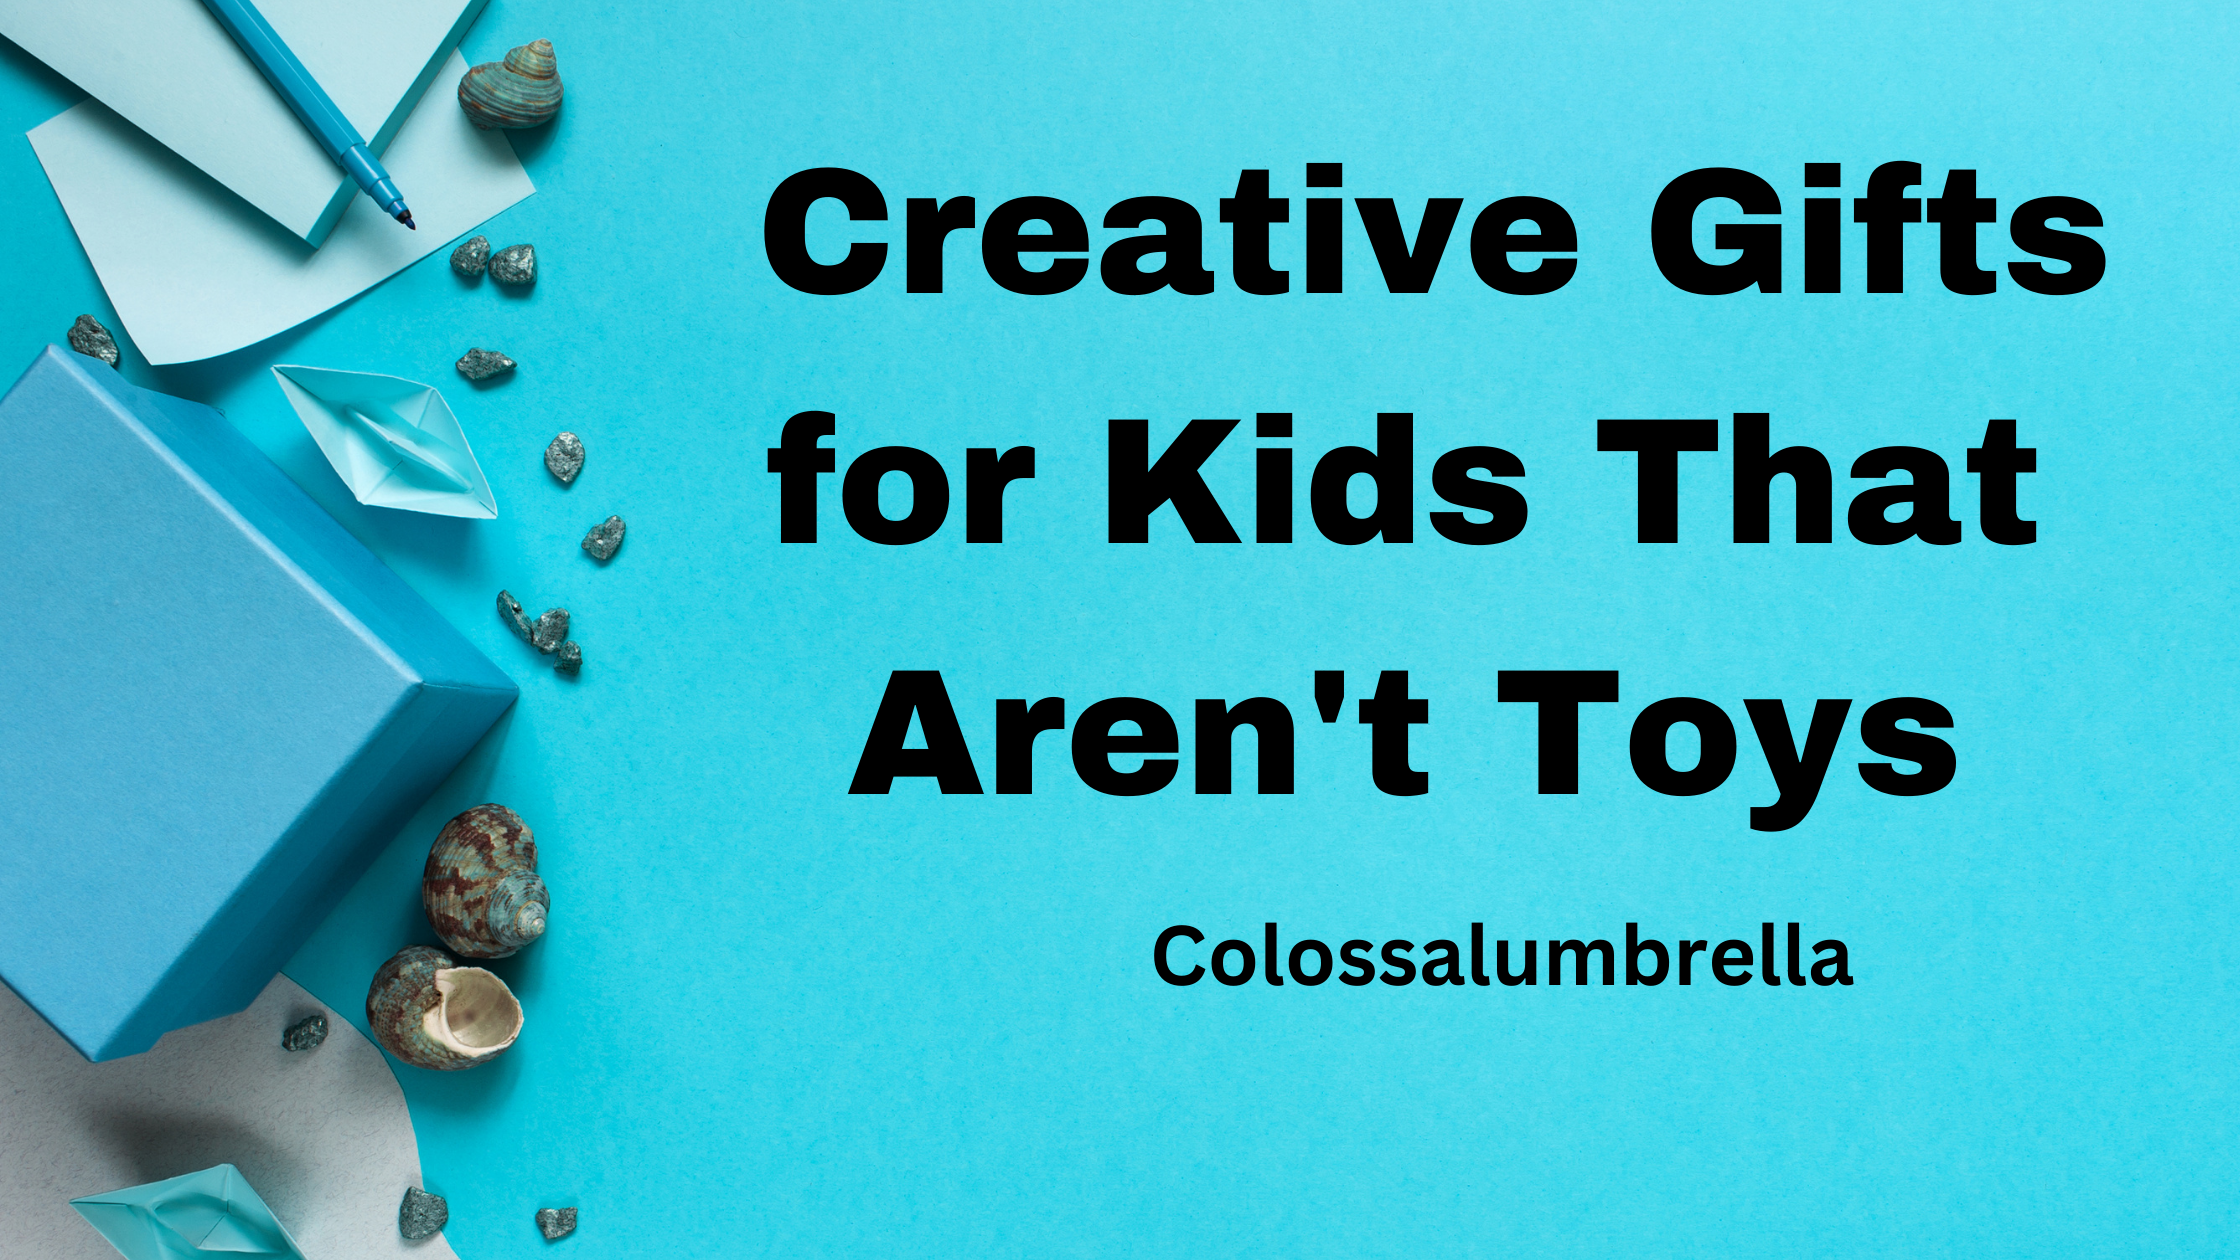 8 Fun and Creative Gifts for Kids That Aren’t Toys